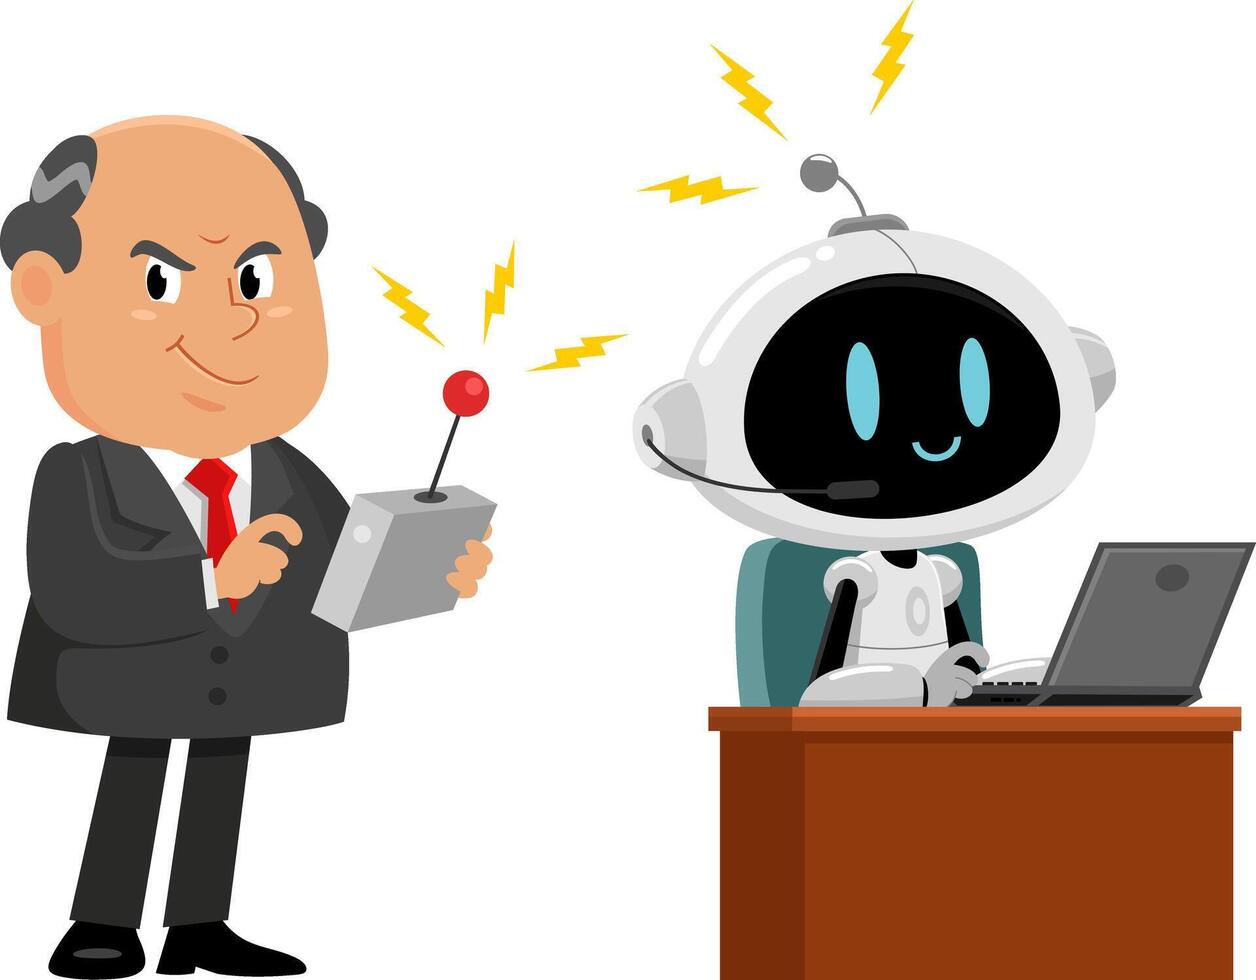 Business Boss Man Cartoon Character Using Remote To Enable AI Robot Control vector